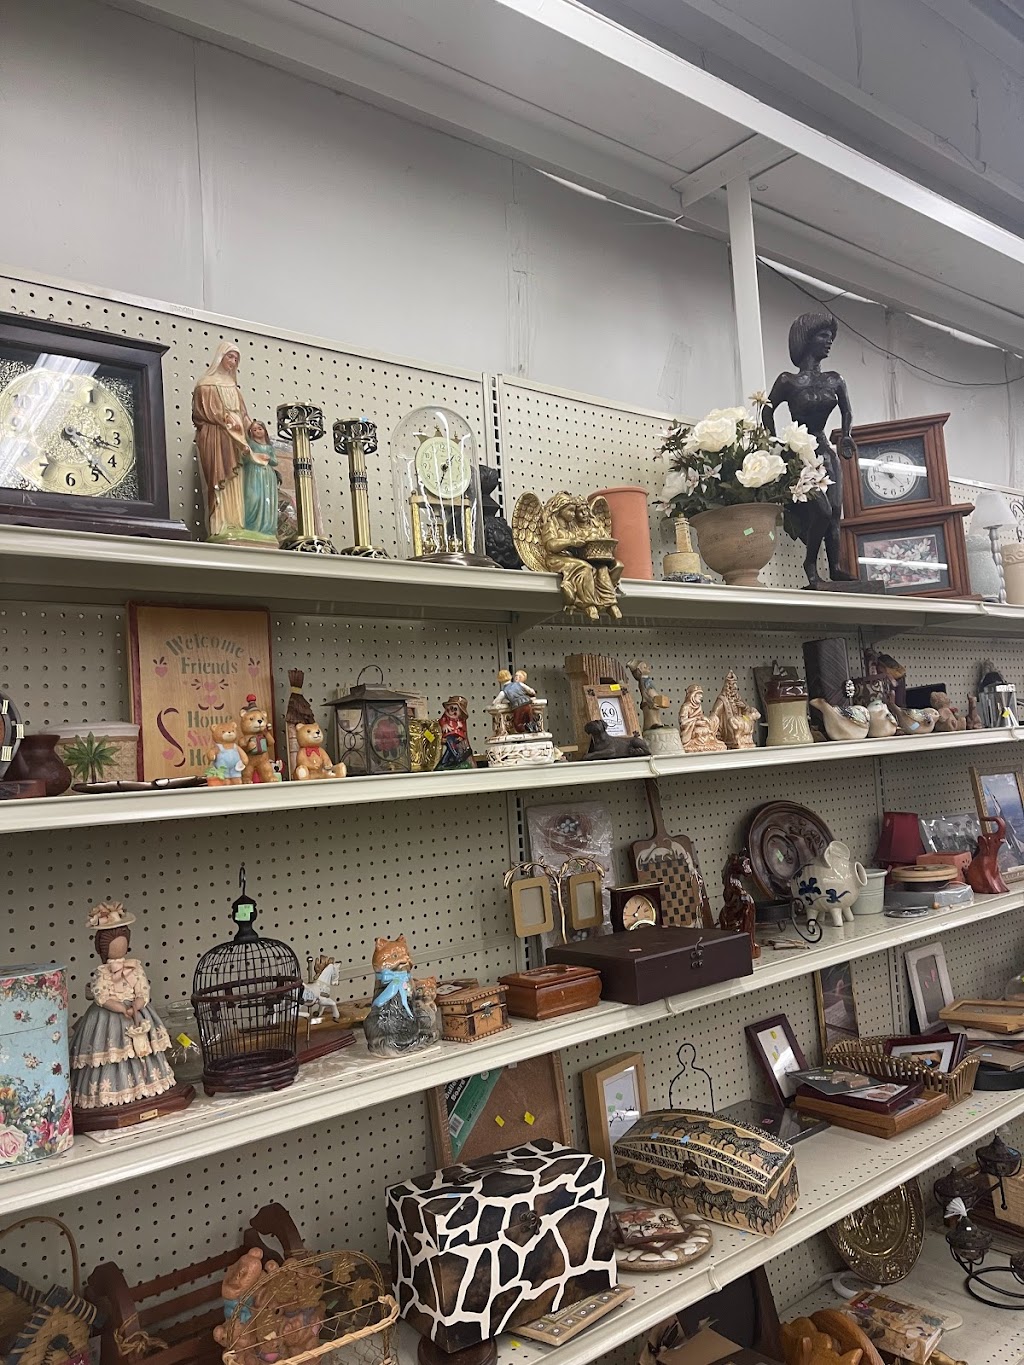 The Salvation Army Thrift Store & Donation Center | 223 E Main St, Westfield, MA 01085 | Phone: (413) 562-0905